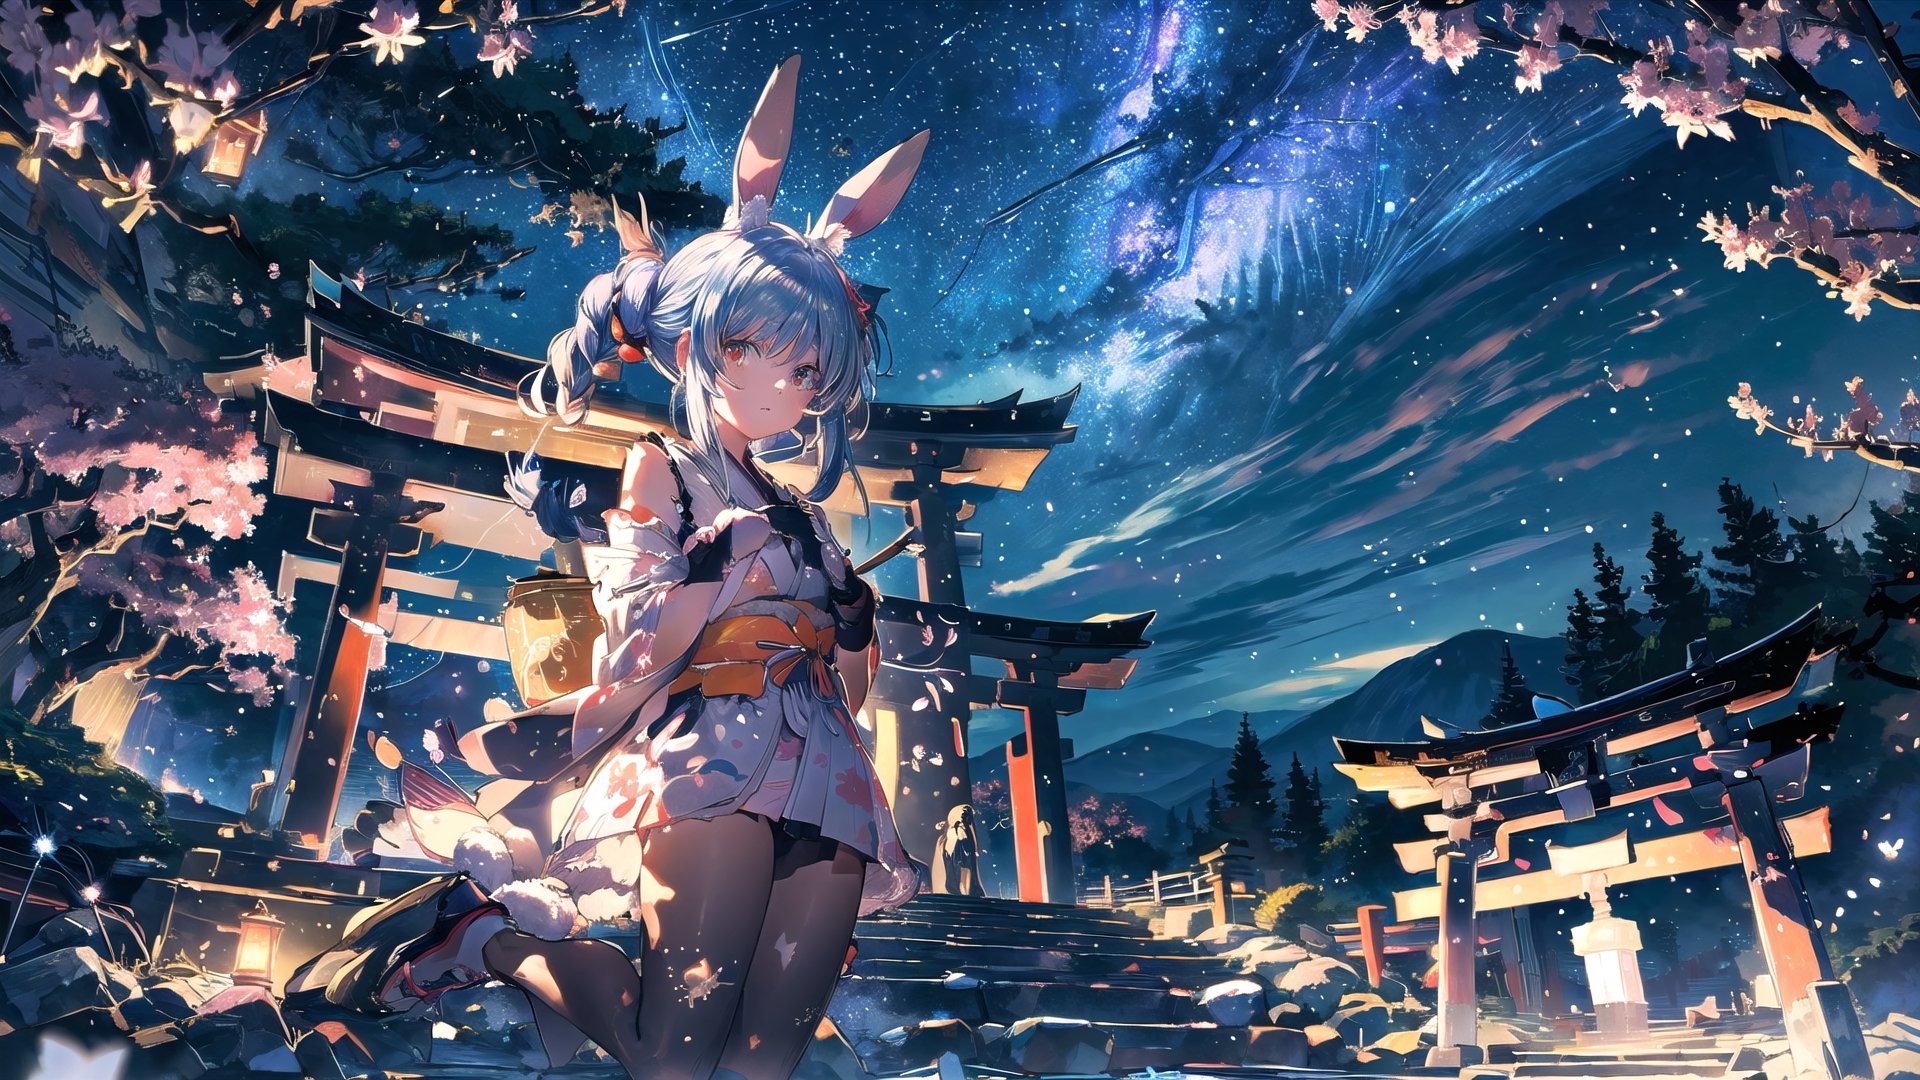 //Quality
(((best quality, 8k wallpaper))), ((detailed eyes, detailed illustration, masterpiece, ultra-detailed)),

//Charater
1girl, solo, usada pekora, kimono1, 

// Pose
upper body, (dynamic angle), 
looking at viewer, 

// Background
((detailed background)), midjourney, yofukashi background,perfect light, (cherry blossoms), extremely delicate and beautiful, ((background: shrine, night stars iridescent)), ((nightime, detailed stars)), Night view in the shrine, A girl prays in front of a shrine at night, behind her is a row of lanterns and a red torii gate